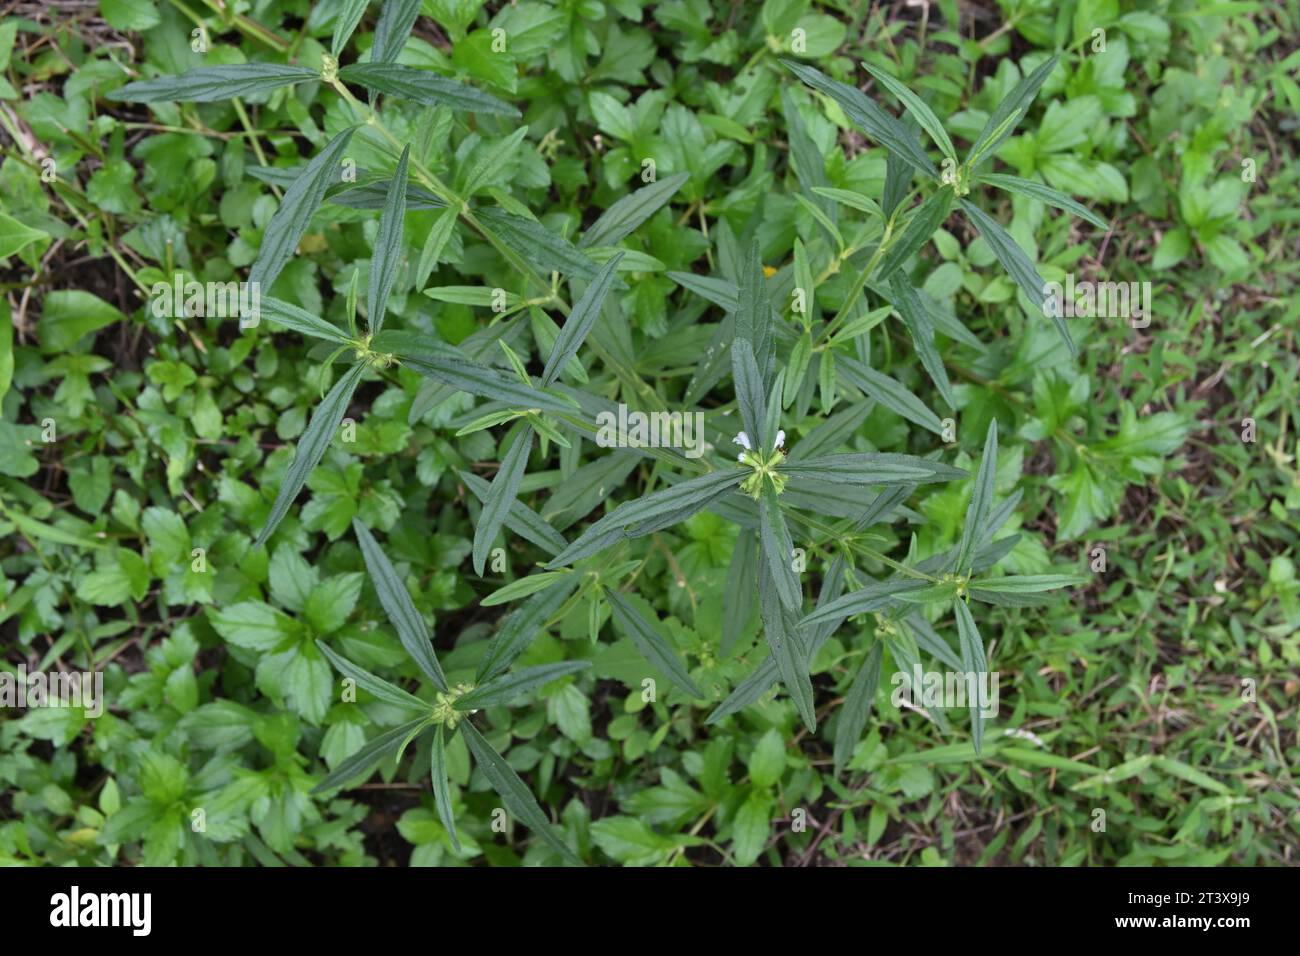 Overhead view of a Ceylon slitwort plant (Leucas Zeylanica) growing in a lawn area .This plant use for both food and medicine, also known as the Thumb Stock Photo